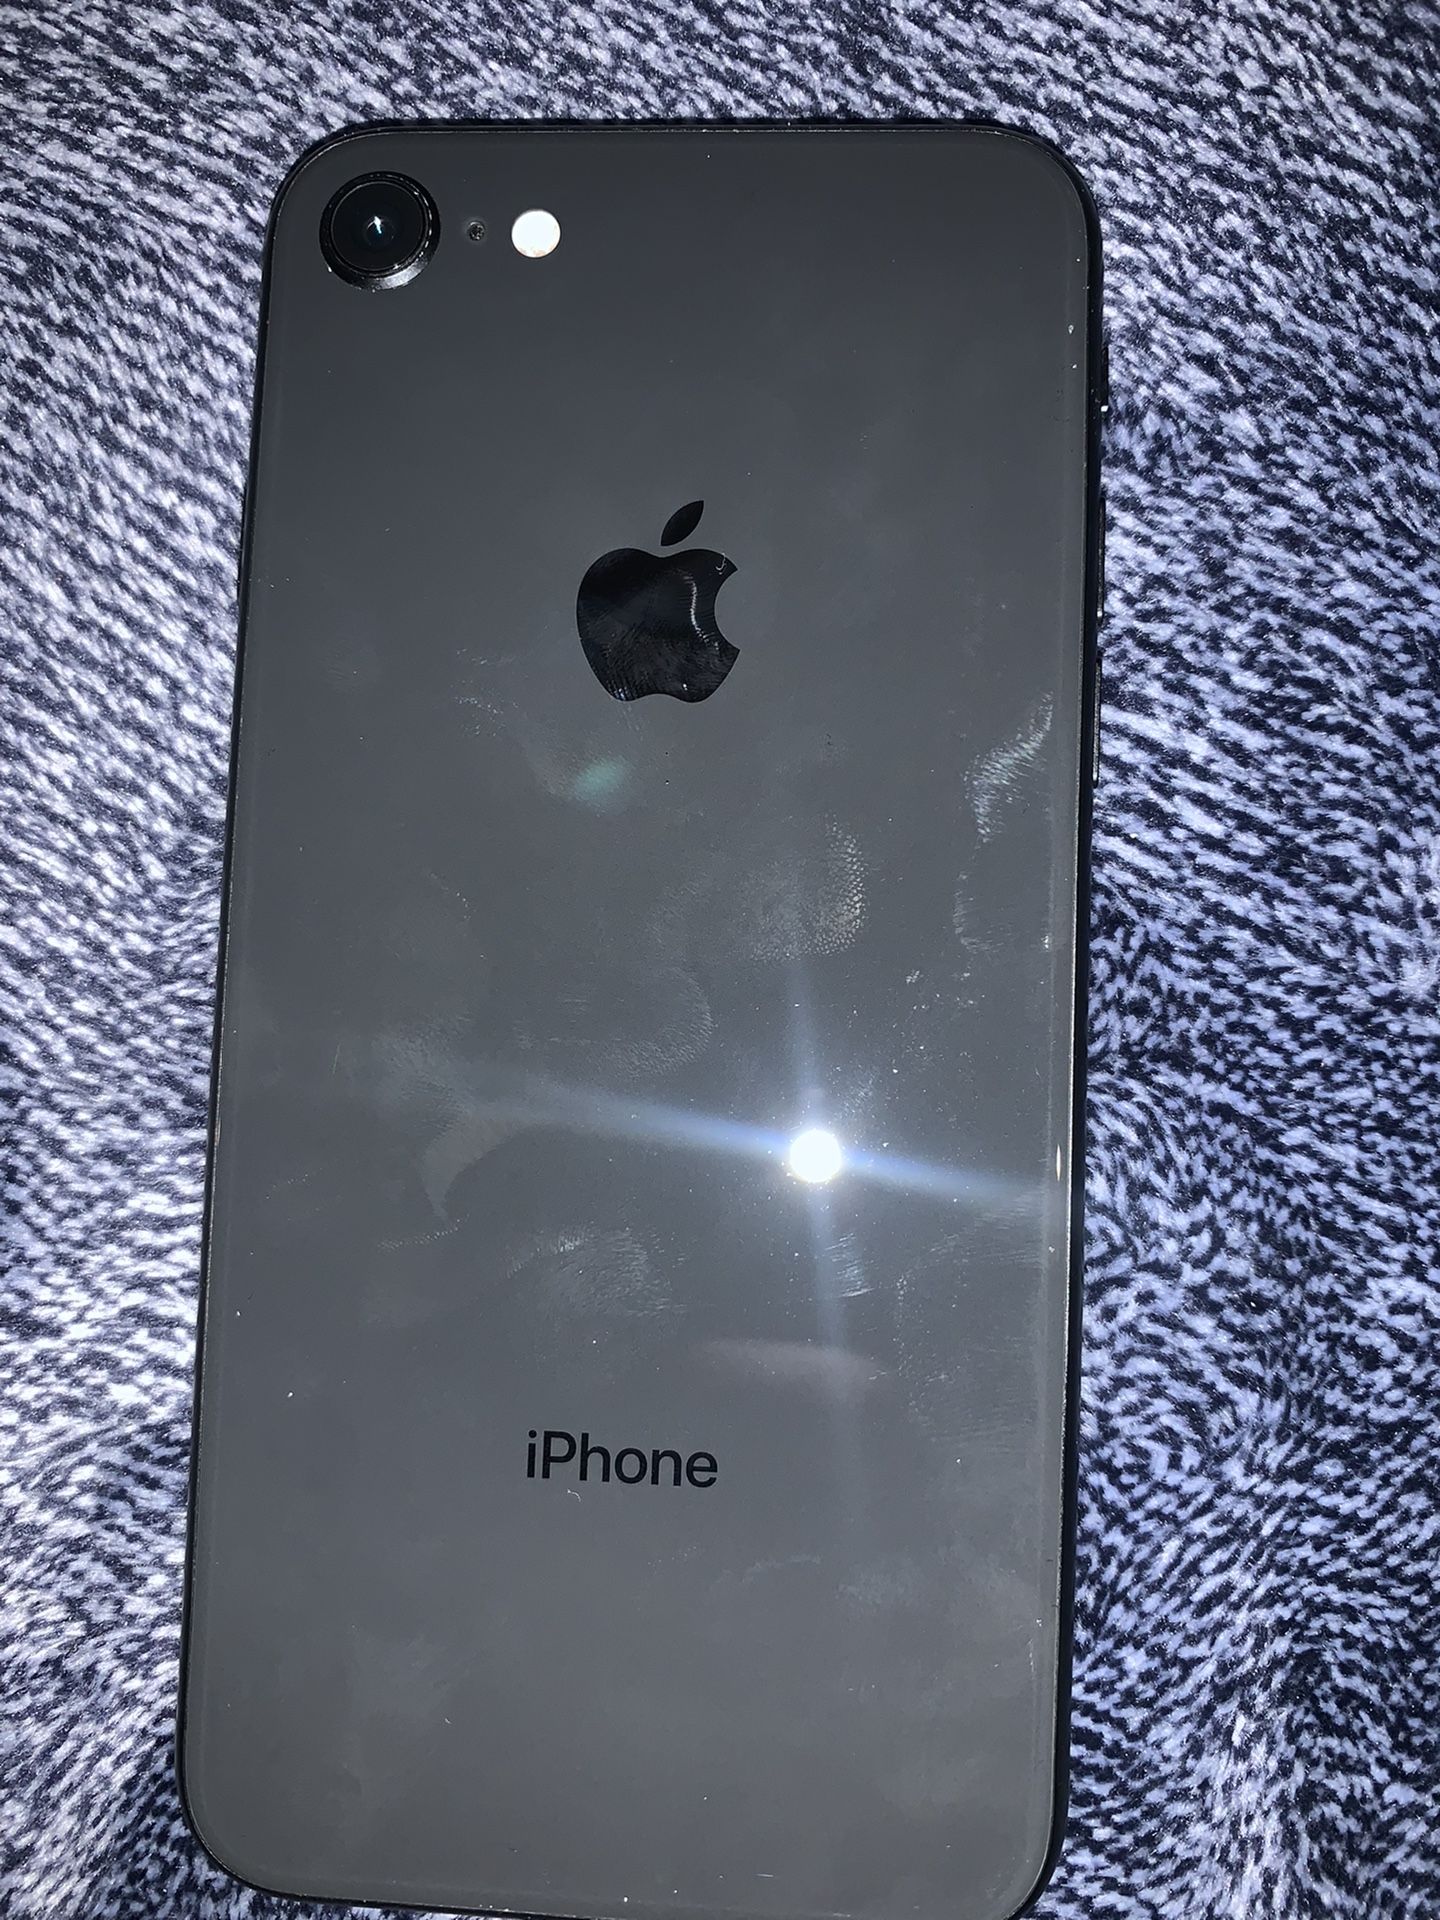 IPHONE 8 UNLOCKED FOR ANY CARRIER 